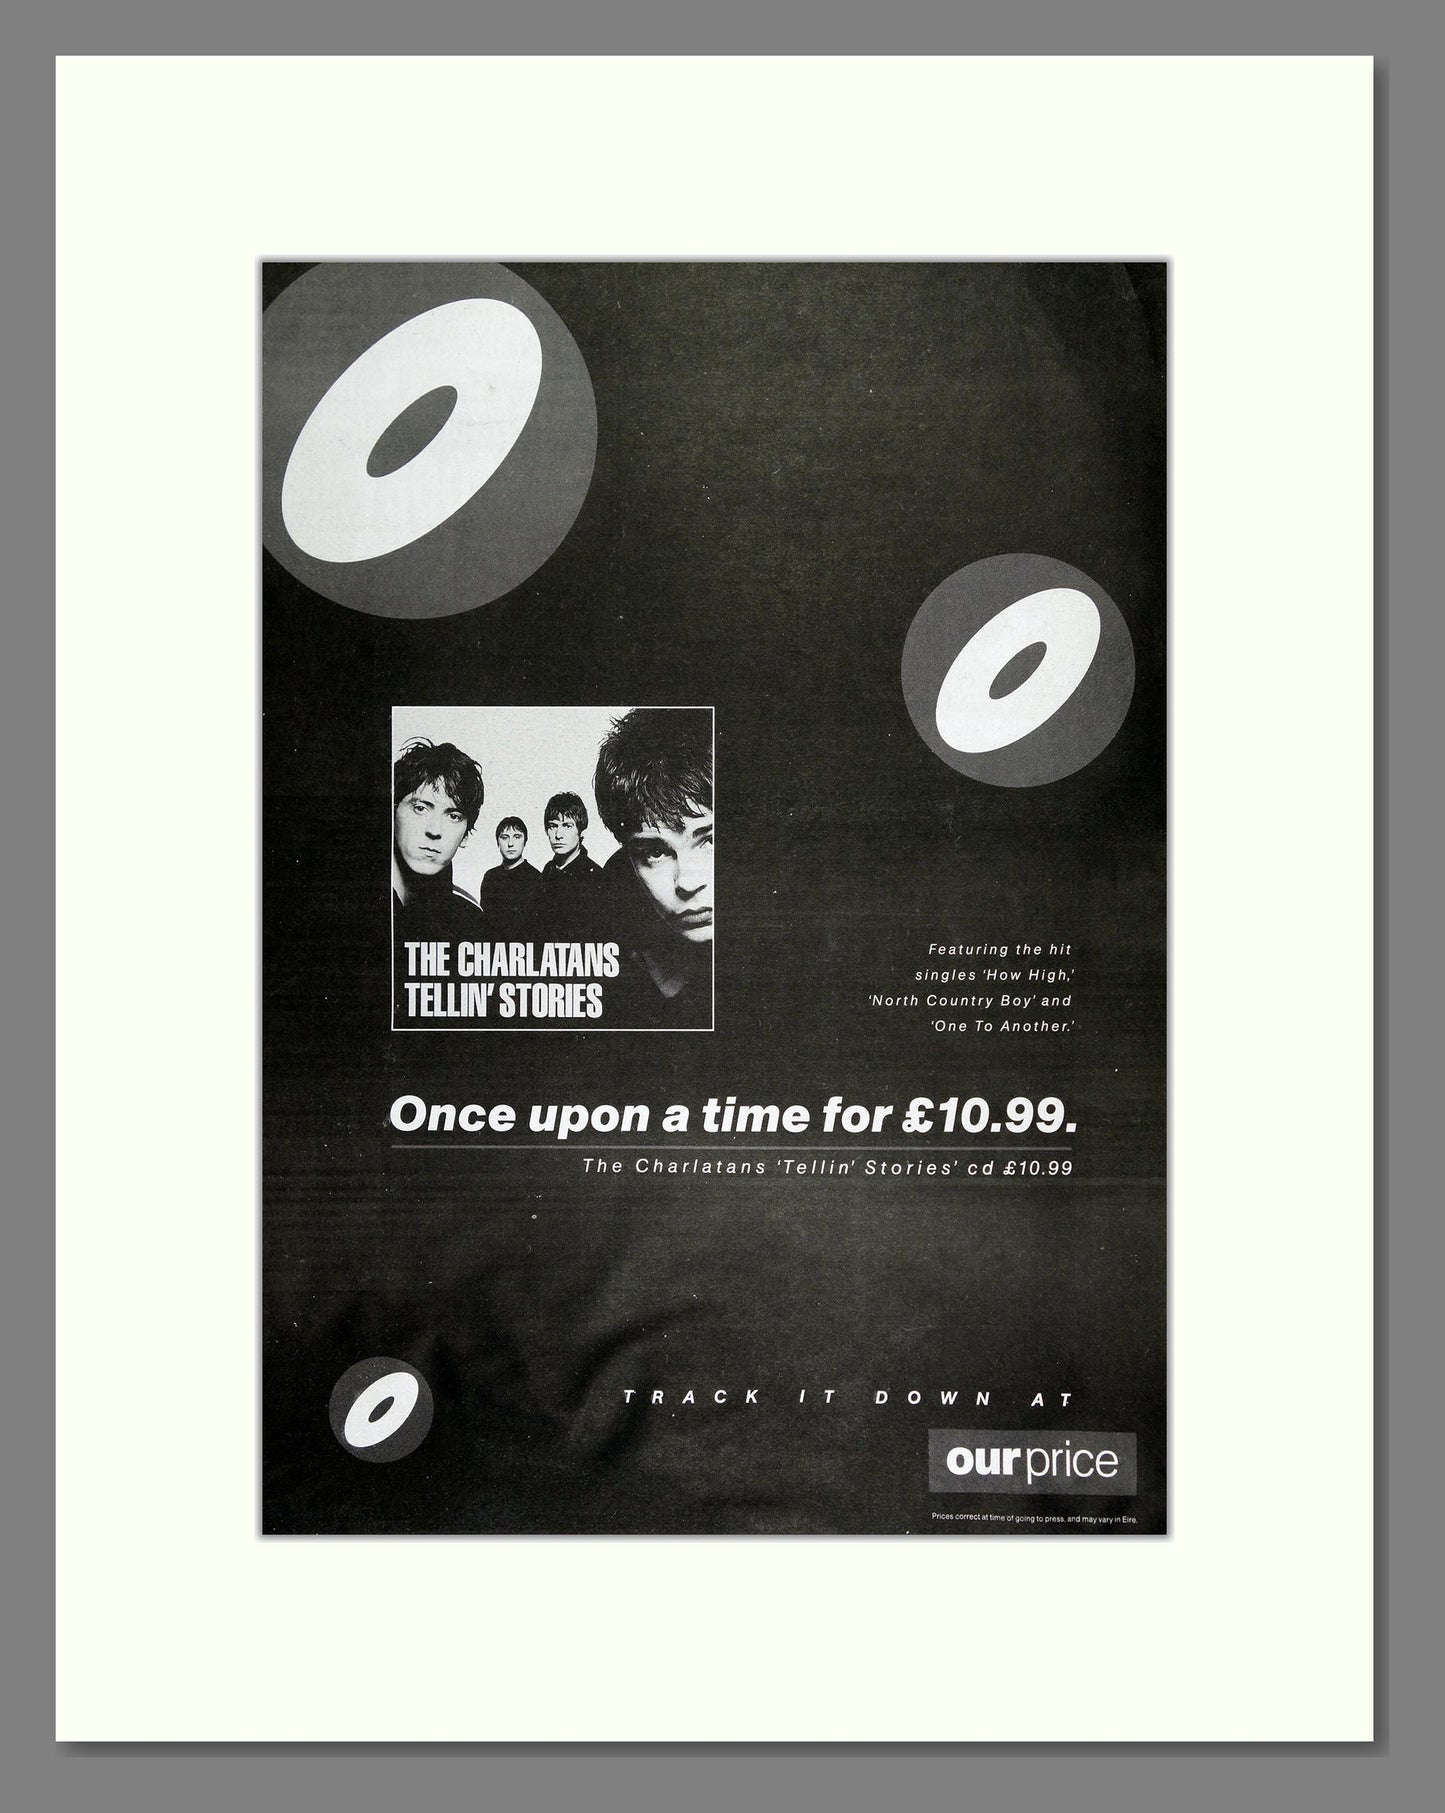 Charlatans (The) - Tellin' Stories. Vintage Advert 1997 (ref AD16269)